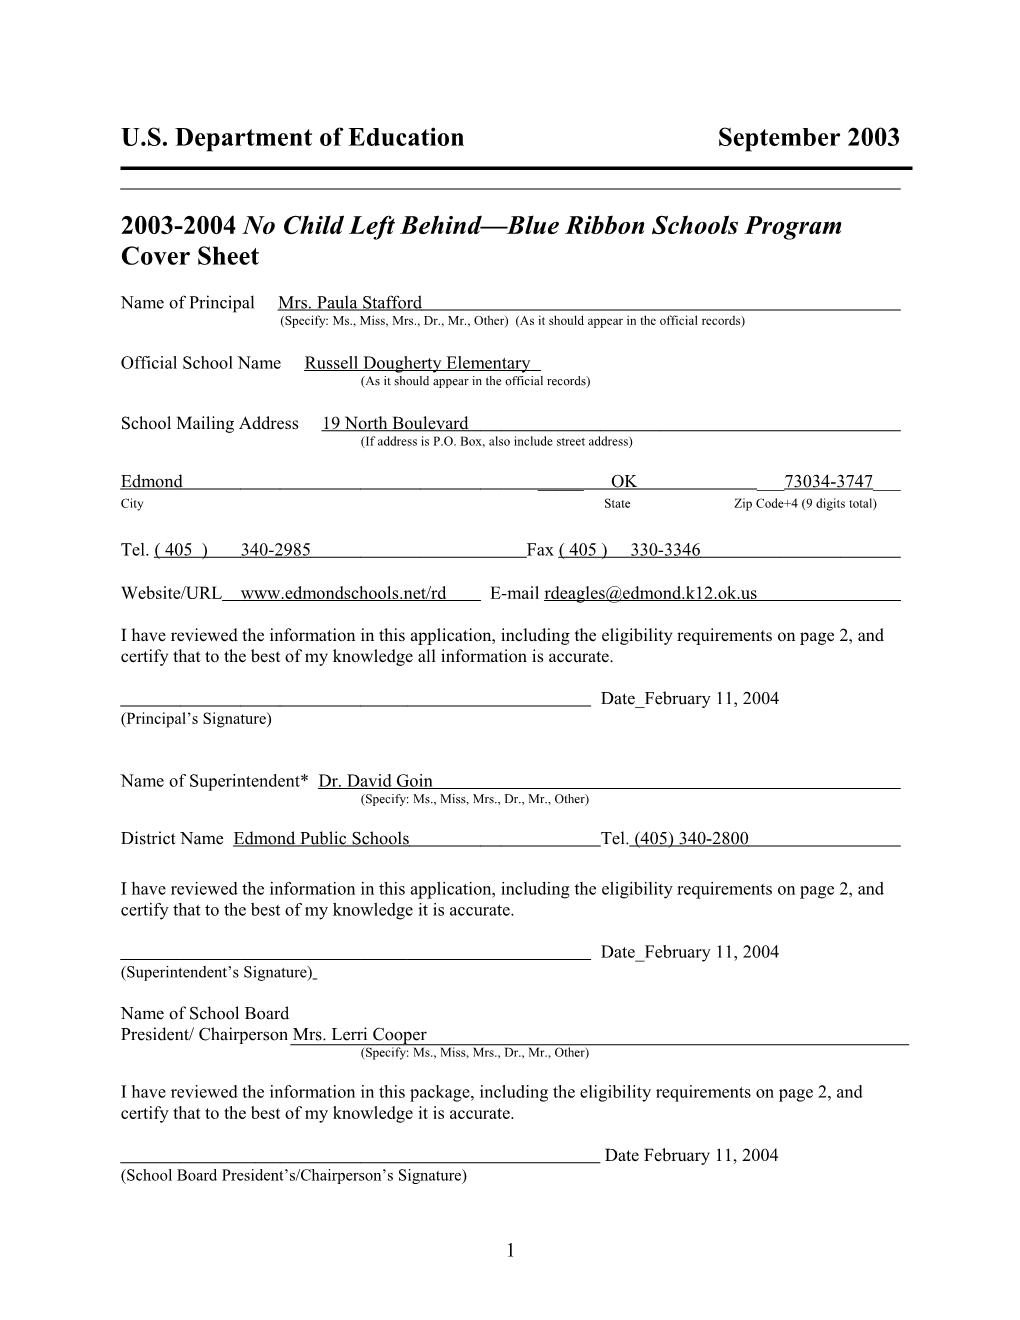 Russell Dougherty Elementary School 2004 No Child Left Behind-Blue Ribbon School Application